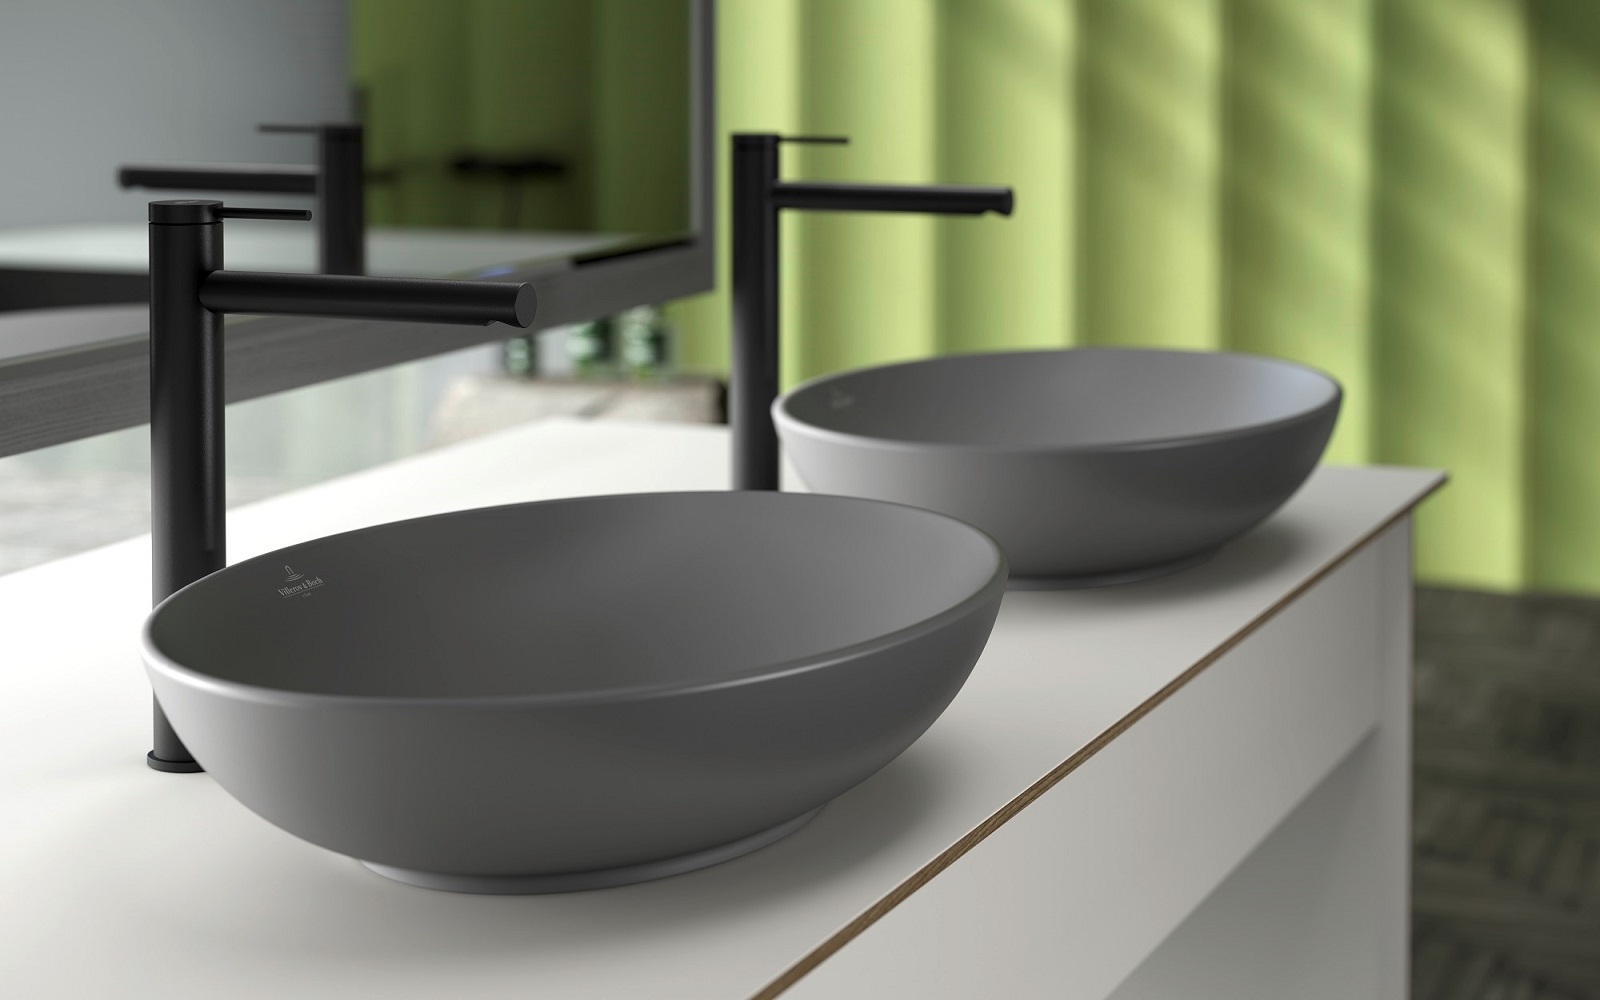 green background with grey handbasin and black tap from Villeroy & Boch Loop & Friends range